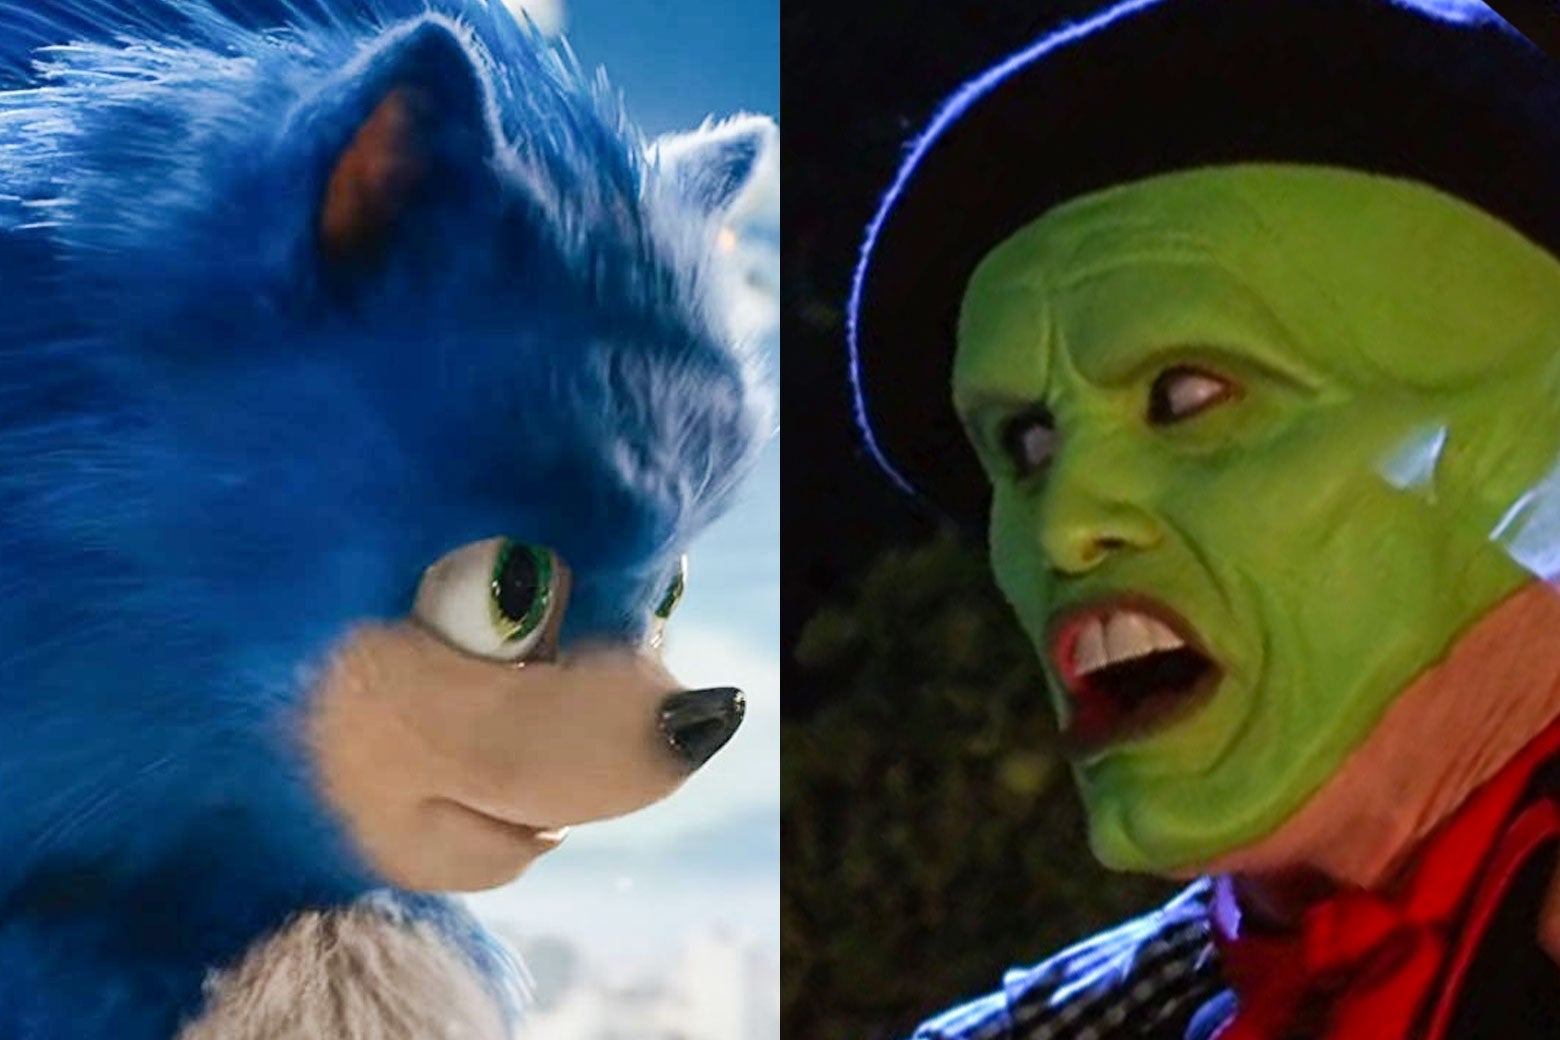 In Sonic the Hedgehog, Jim Carrey out-cartoons the cartoons.